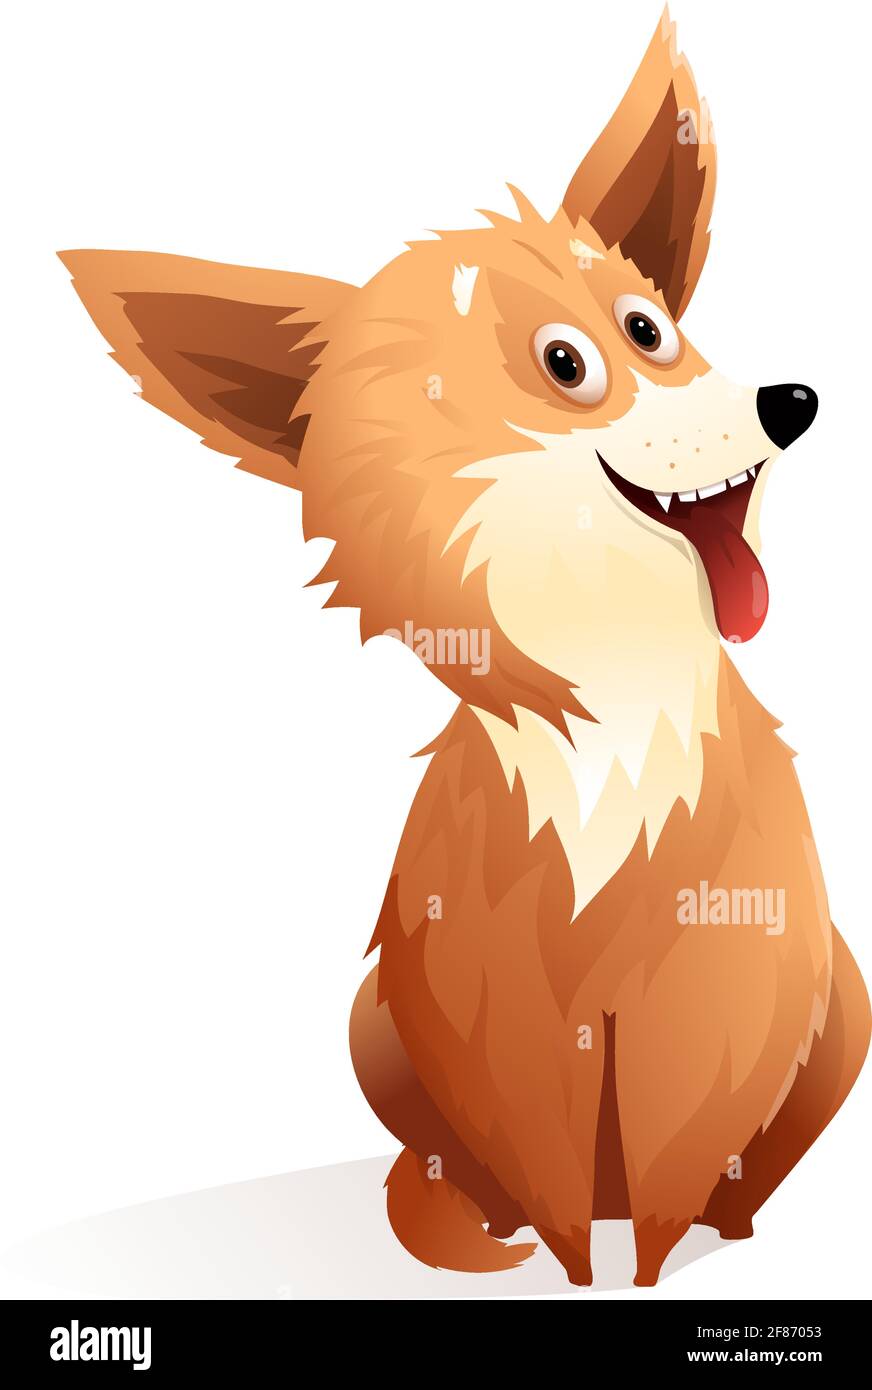 Smiling Playful Dog or Puppy Mascot Stock Vector